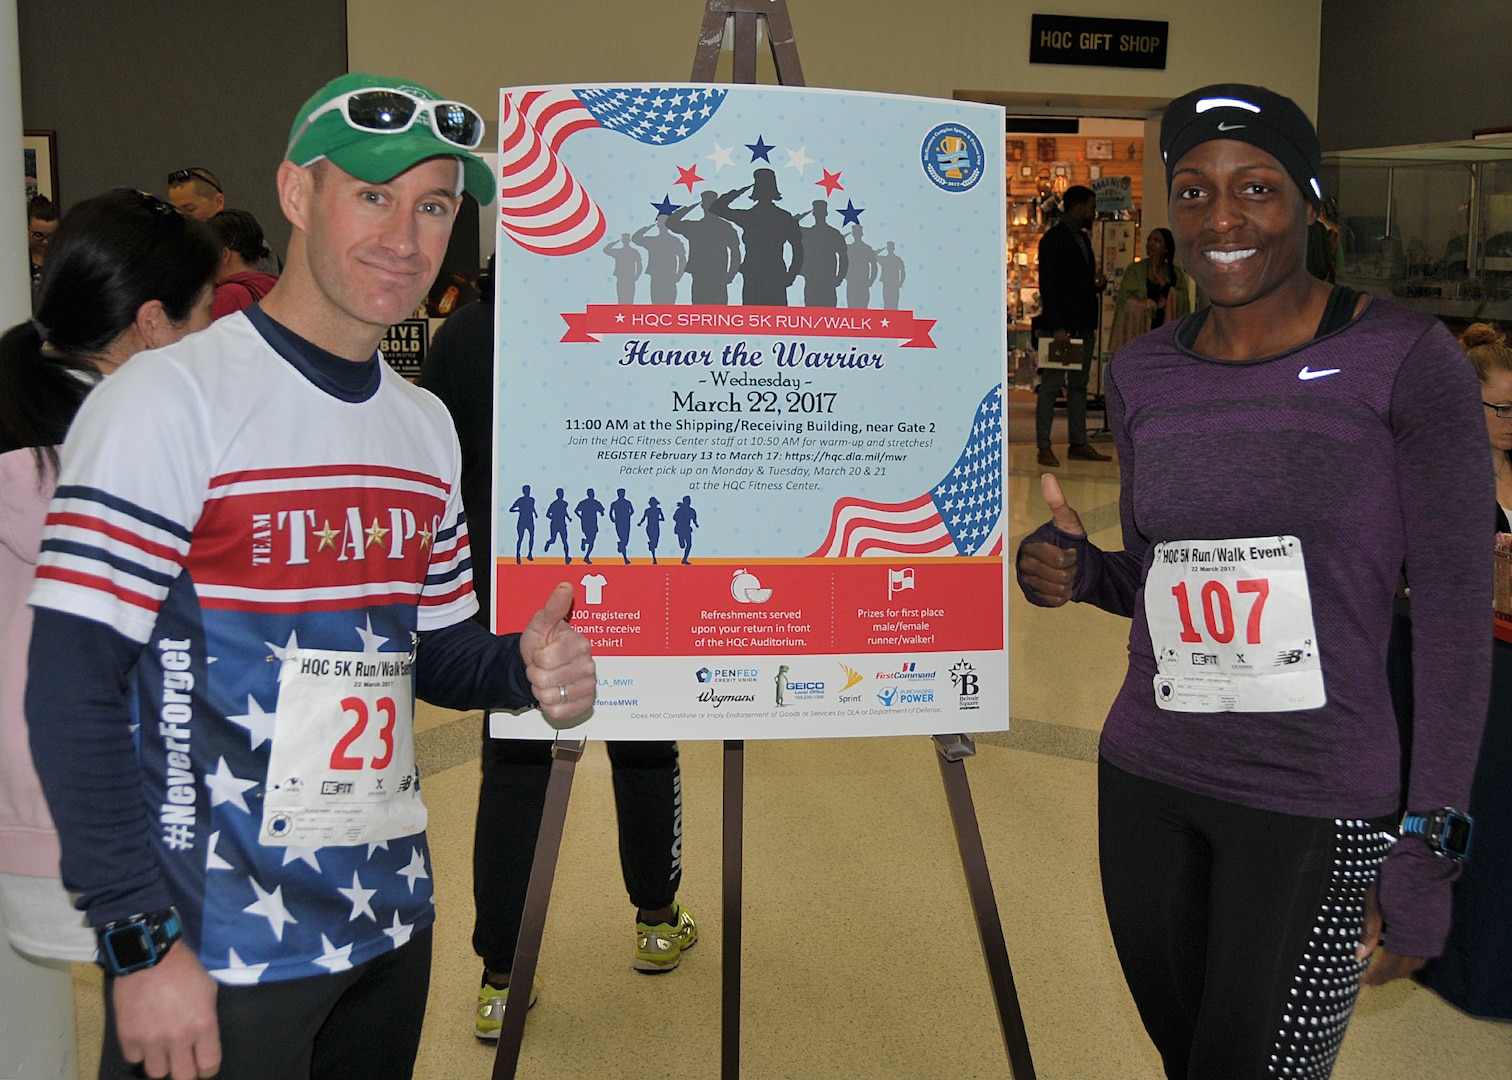 Navy Lt. Cdr. Ryan Stickel of DLA Logistics Operations and Army Chief Warrant Officer 4 Beofra Butler of DLA Human Resources, the no. 2 male and no. 1 female finishers, relax after the event.